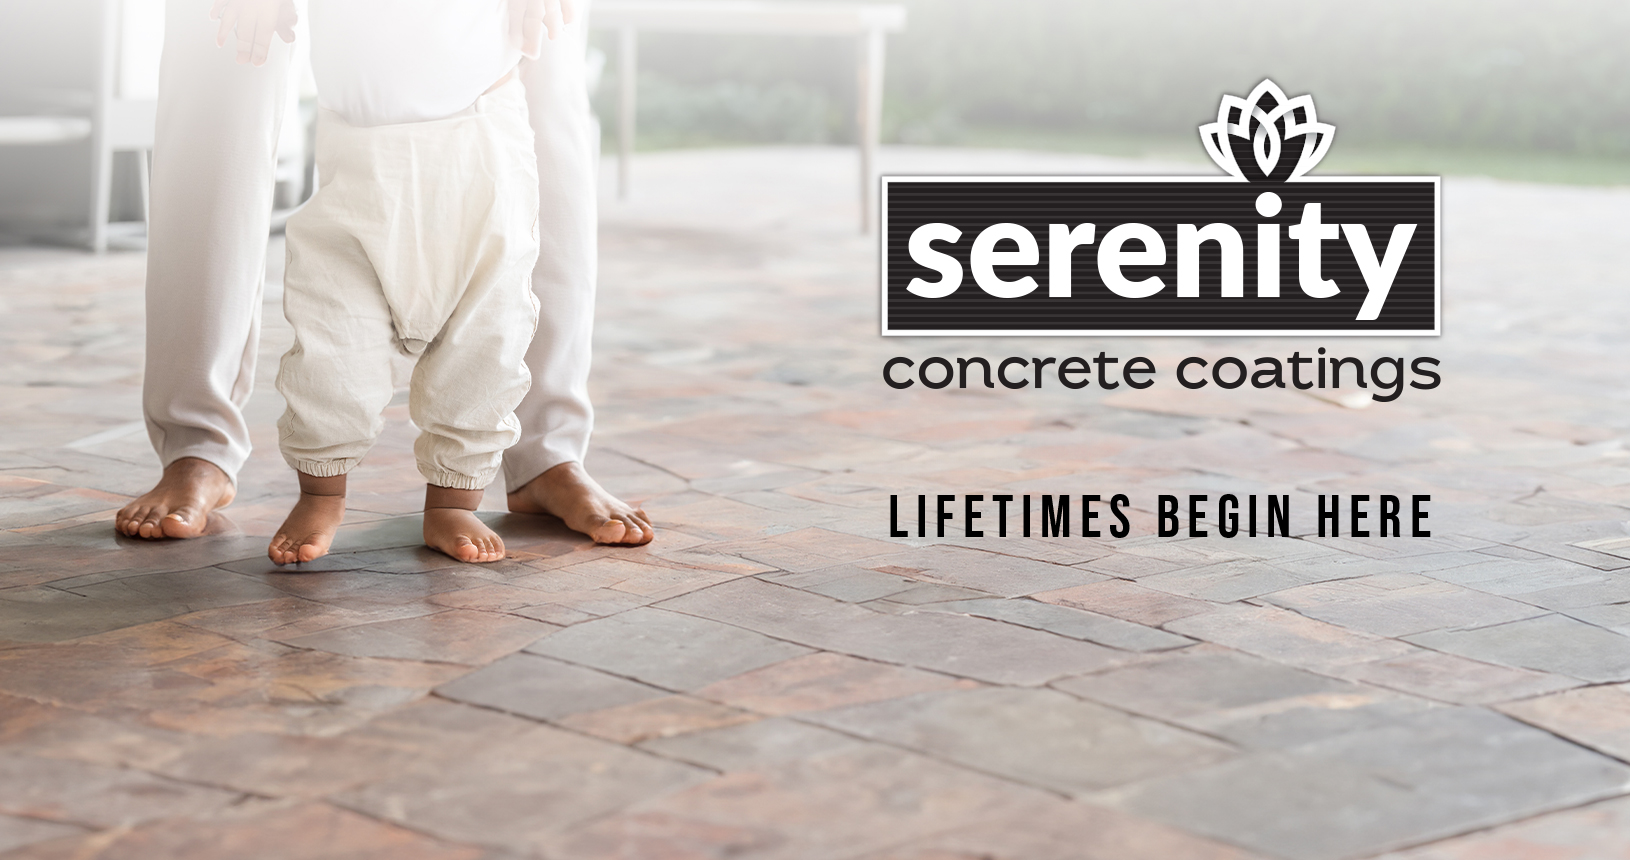 Serenity Concrete Coatings Logo and Tagline branding from wrapmasters